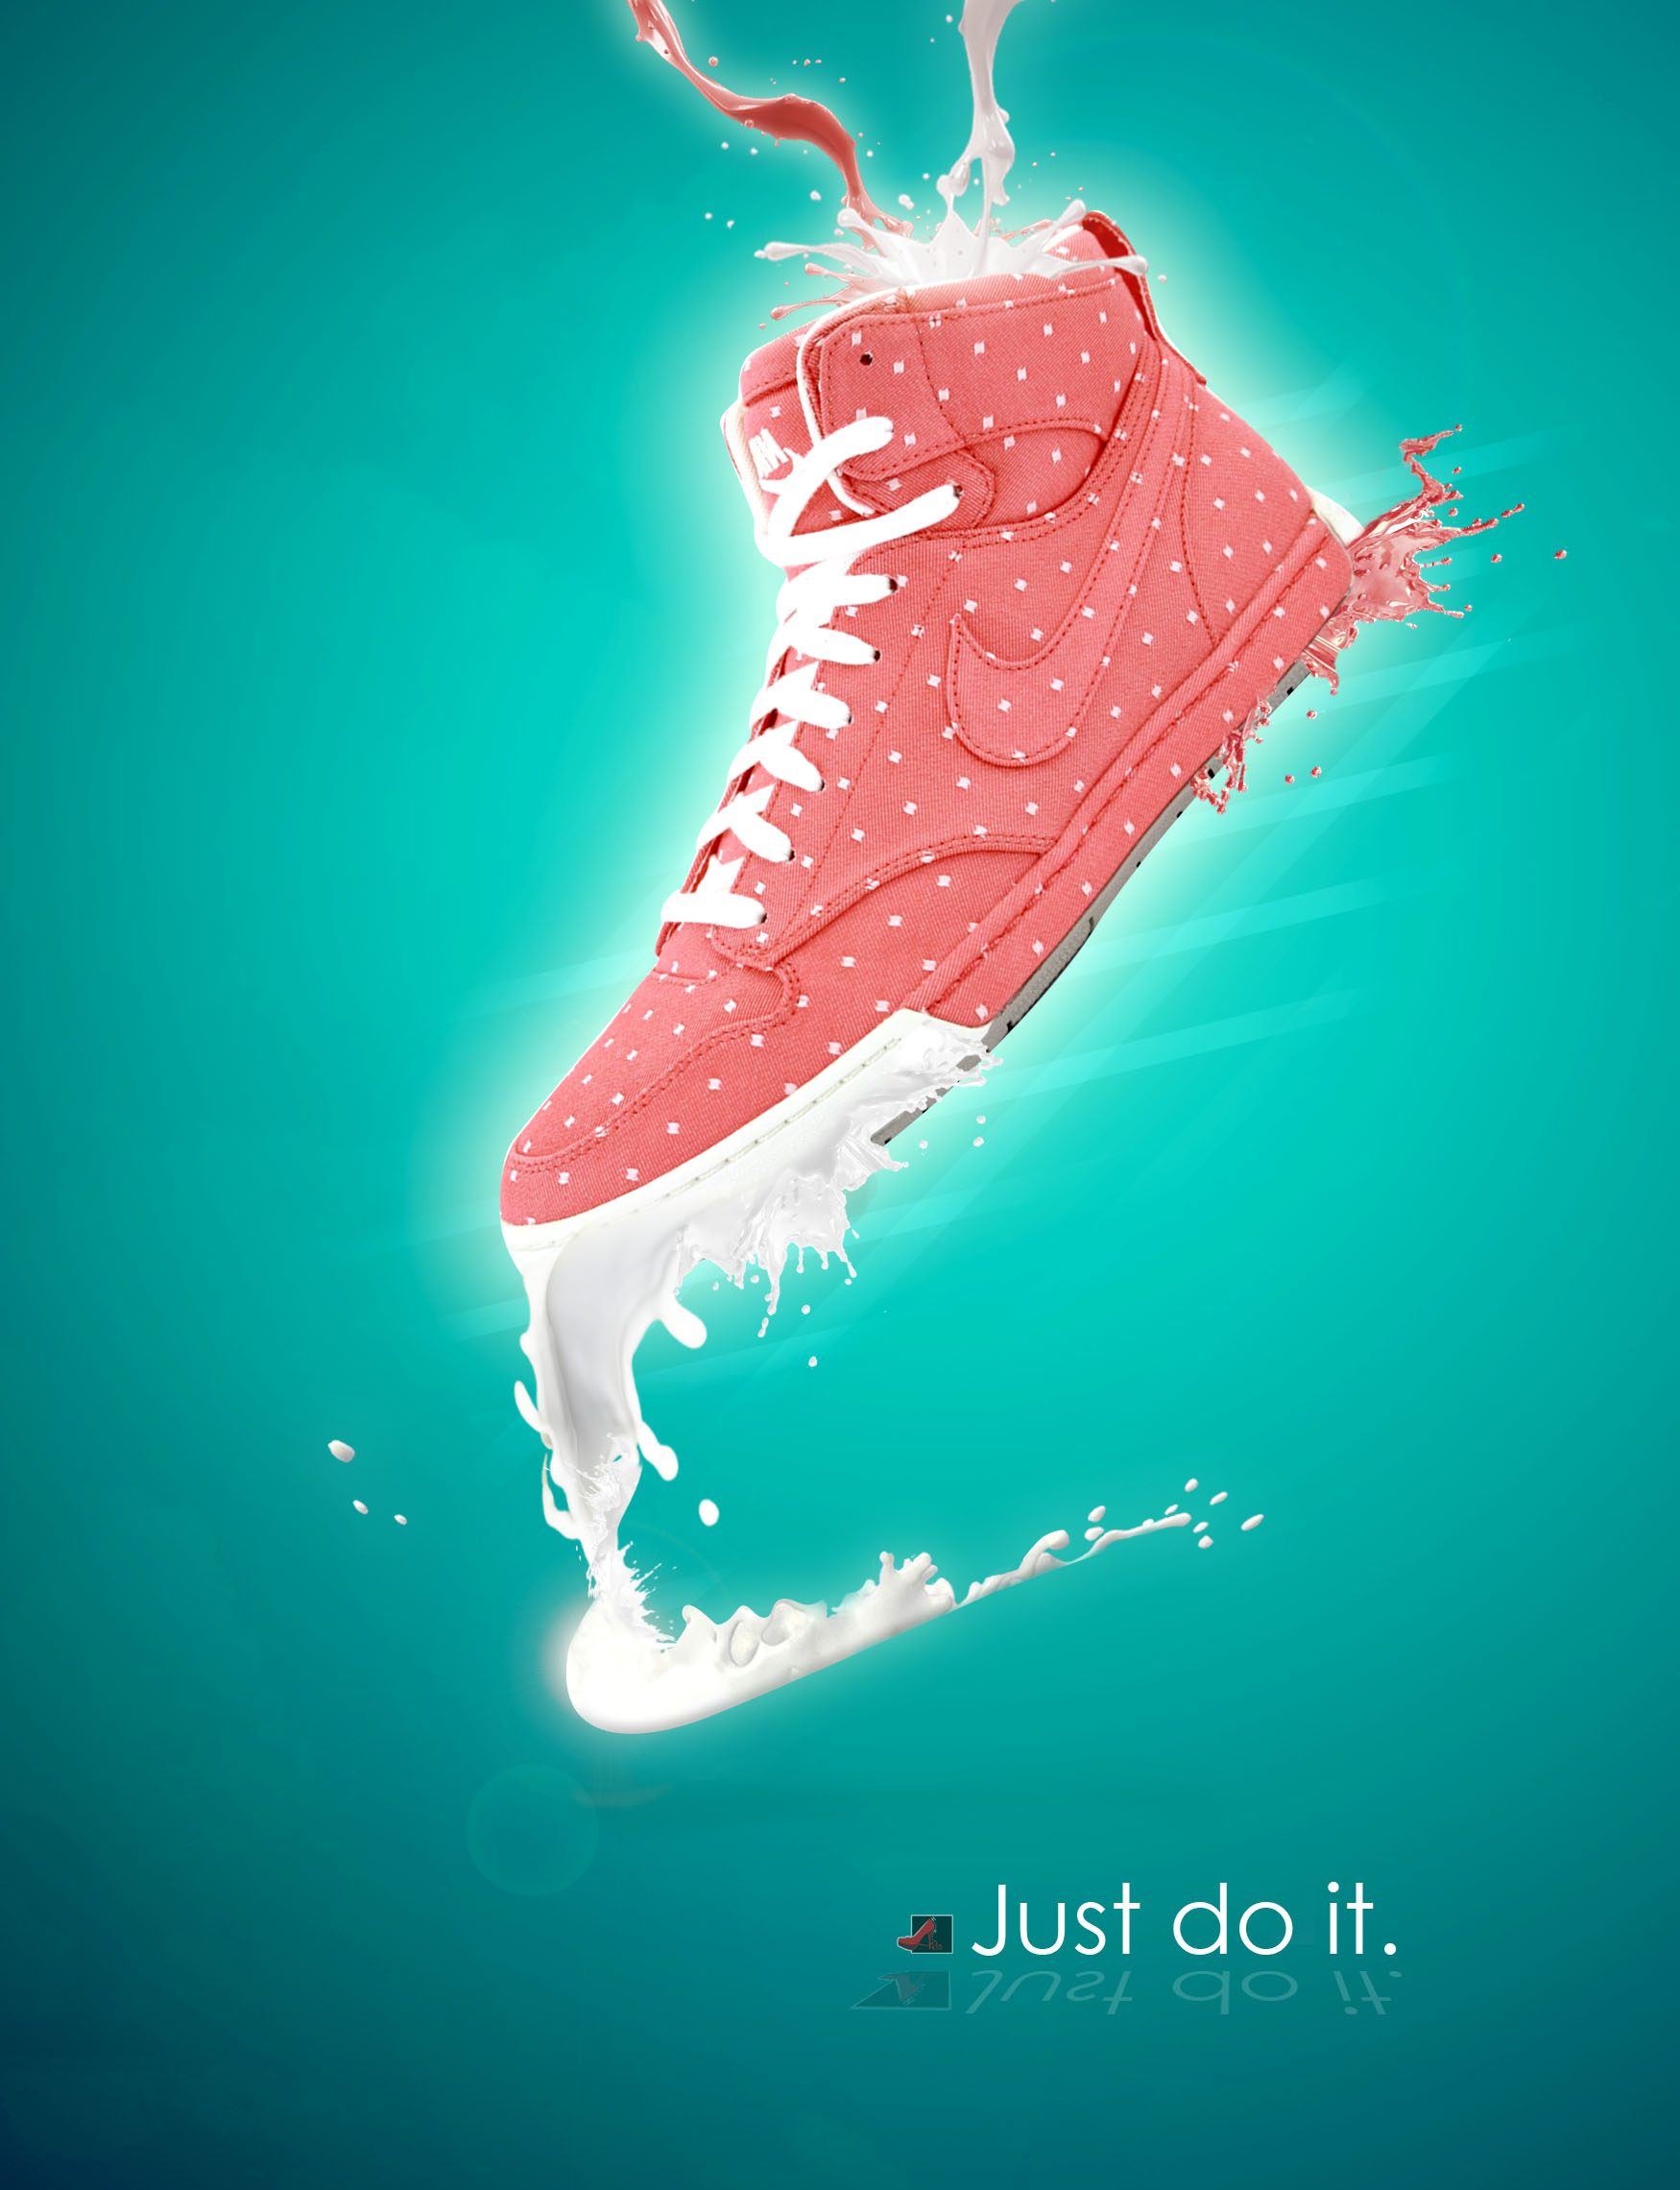 Nike Ad by High-Heels-Ads on DeviantArt